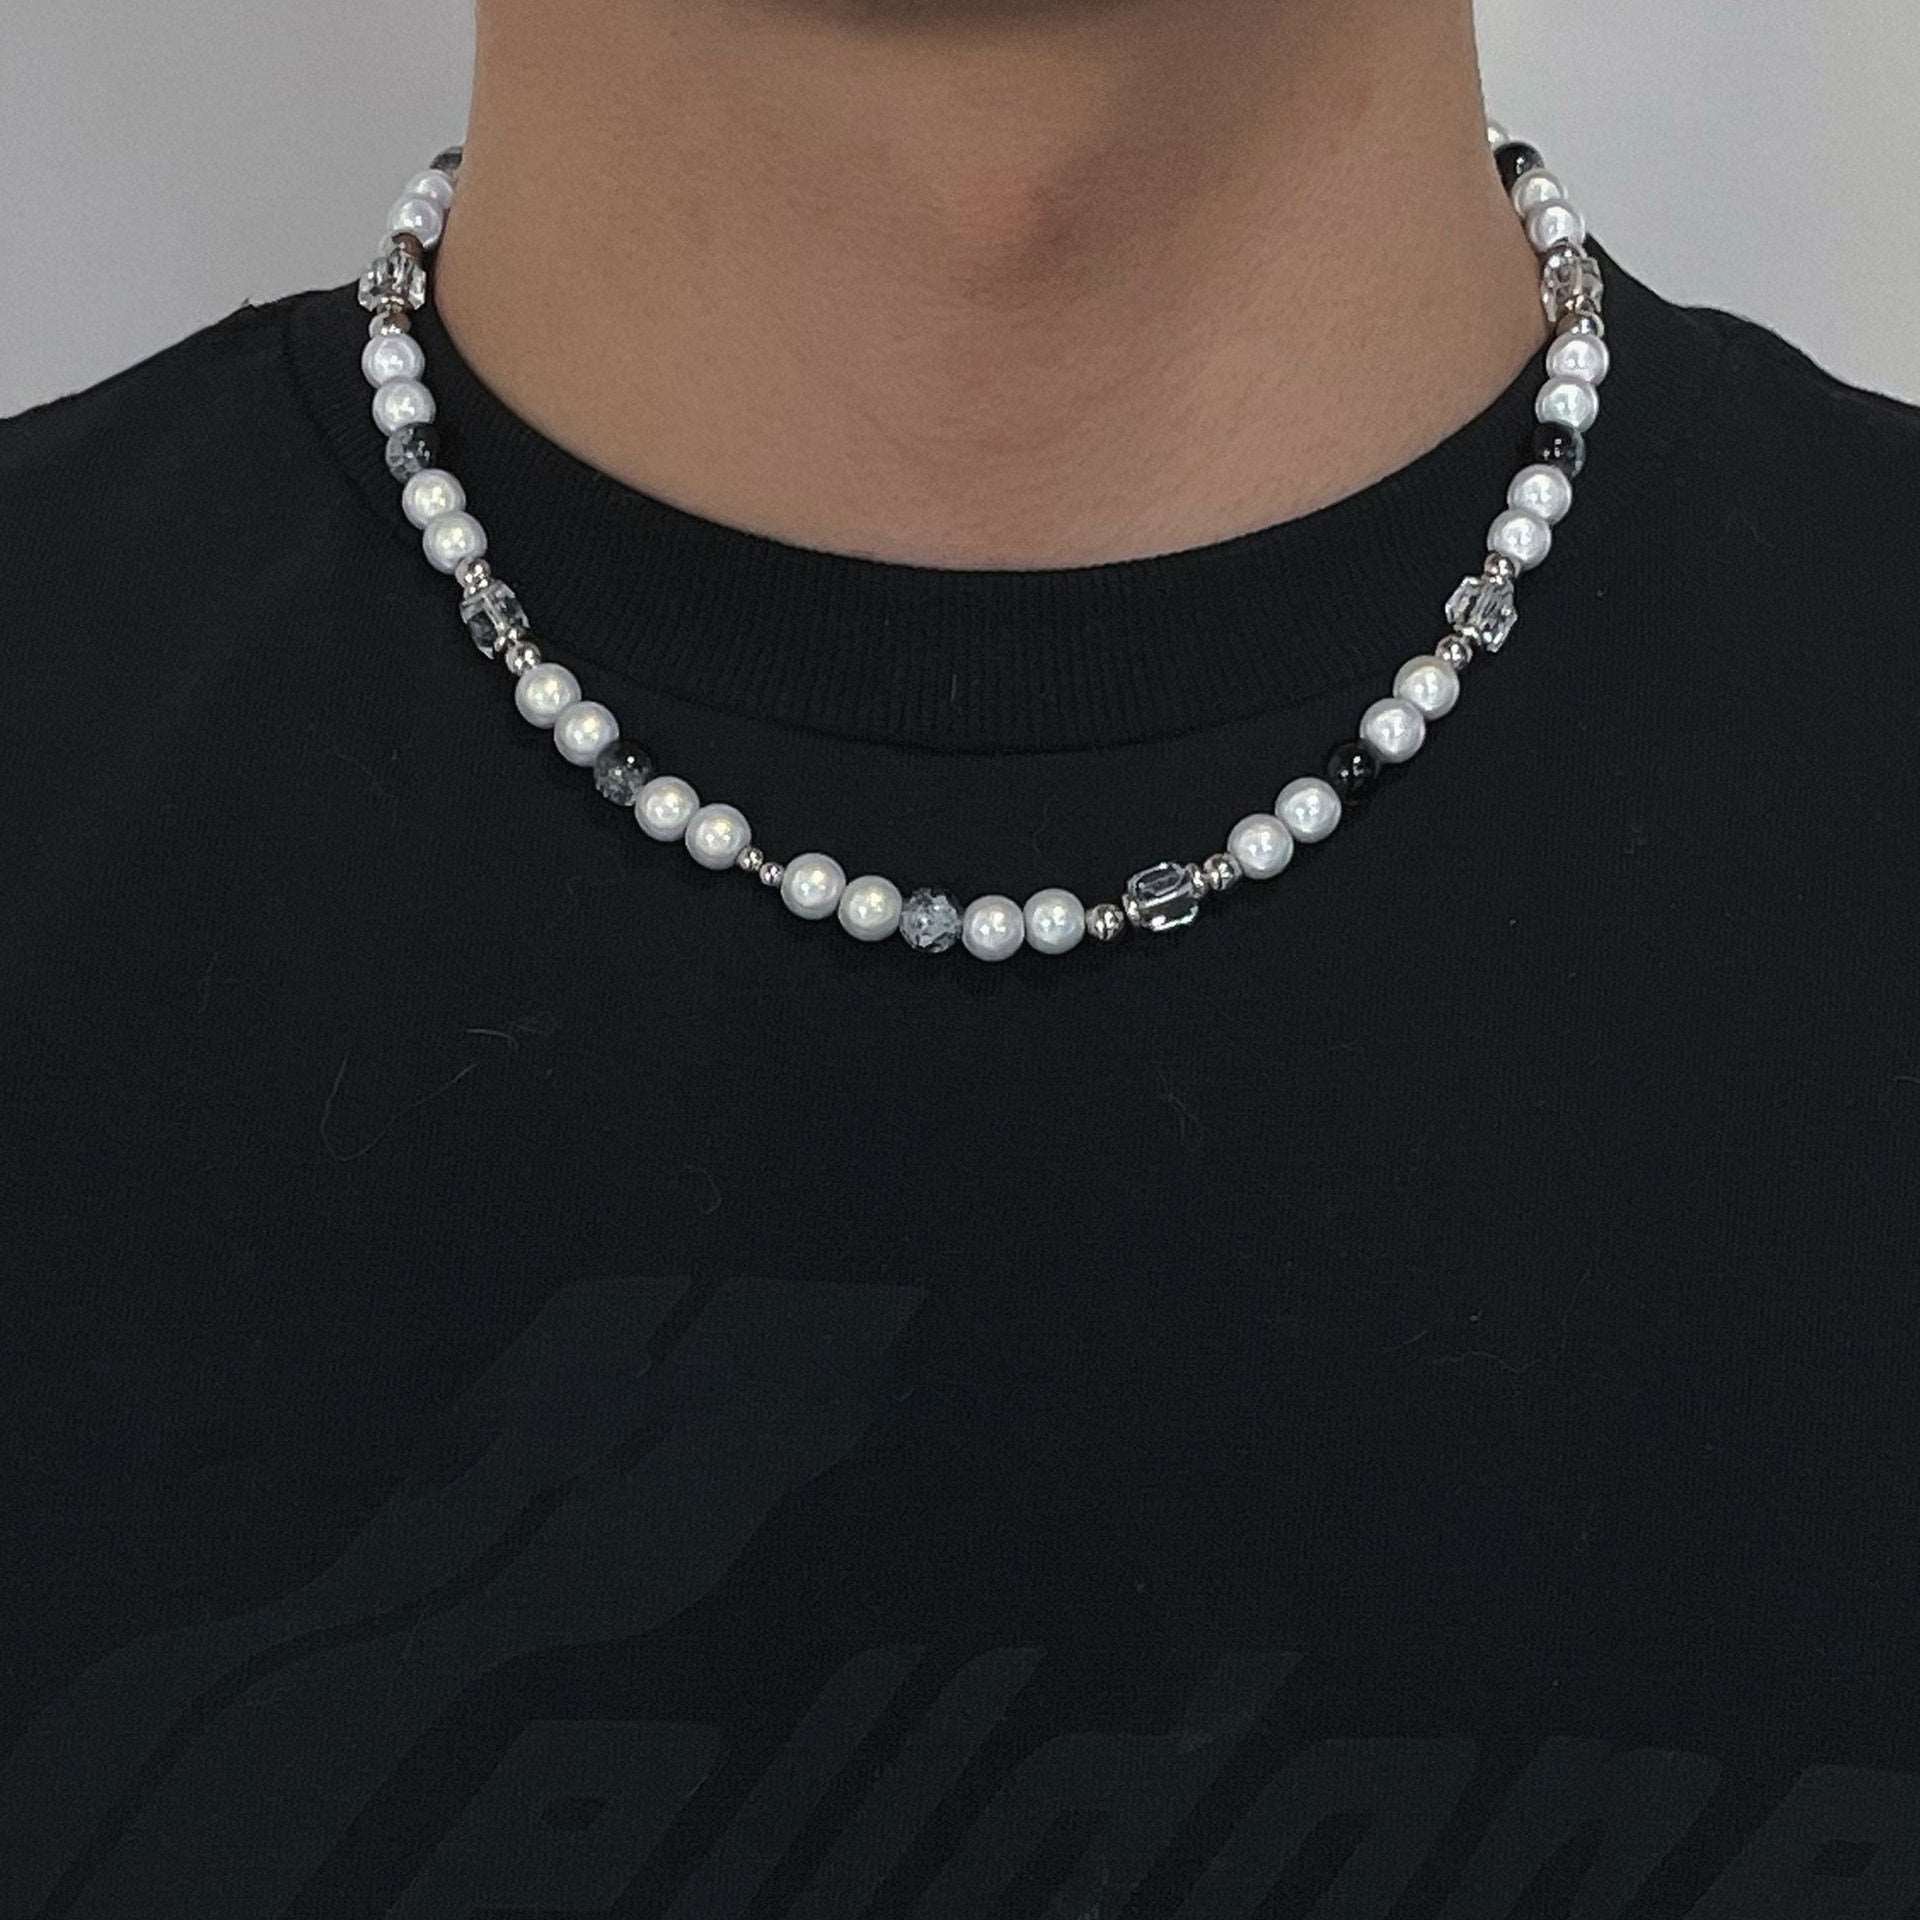 Steel Necklace - "Pearls Reflect"